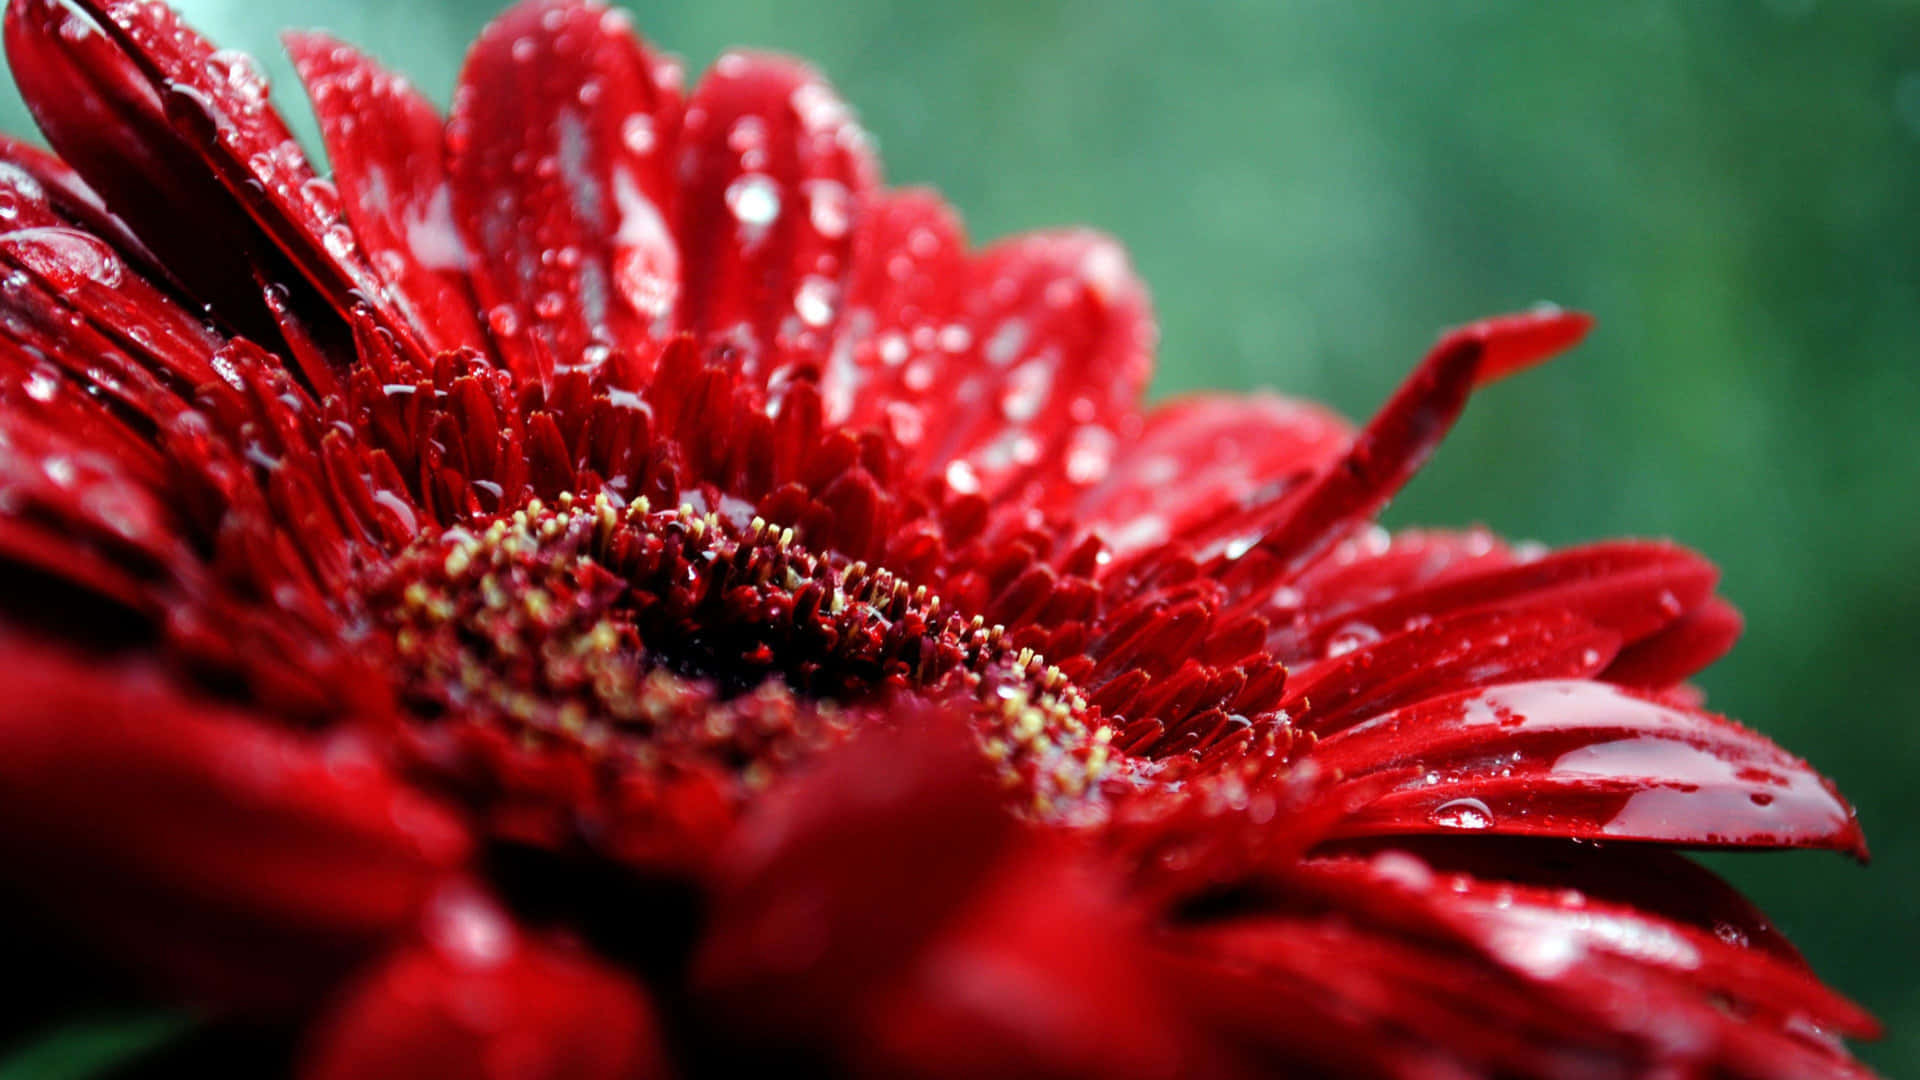 A Red Flower With Water Droplets On It